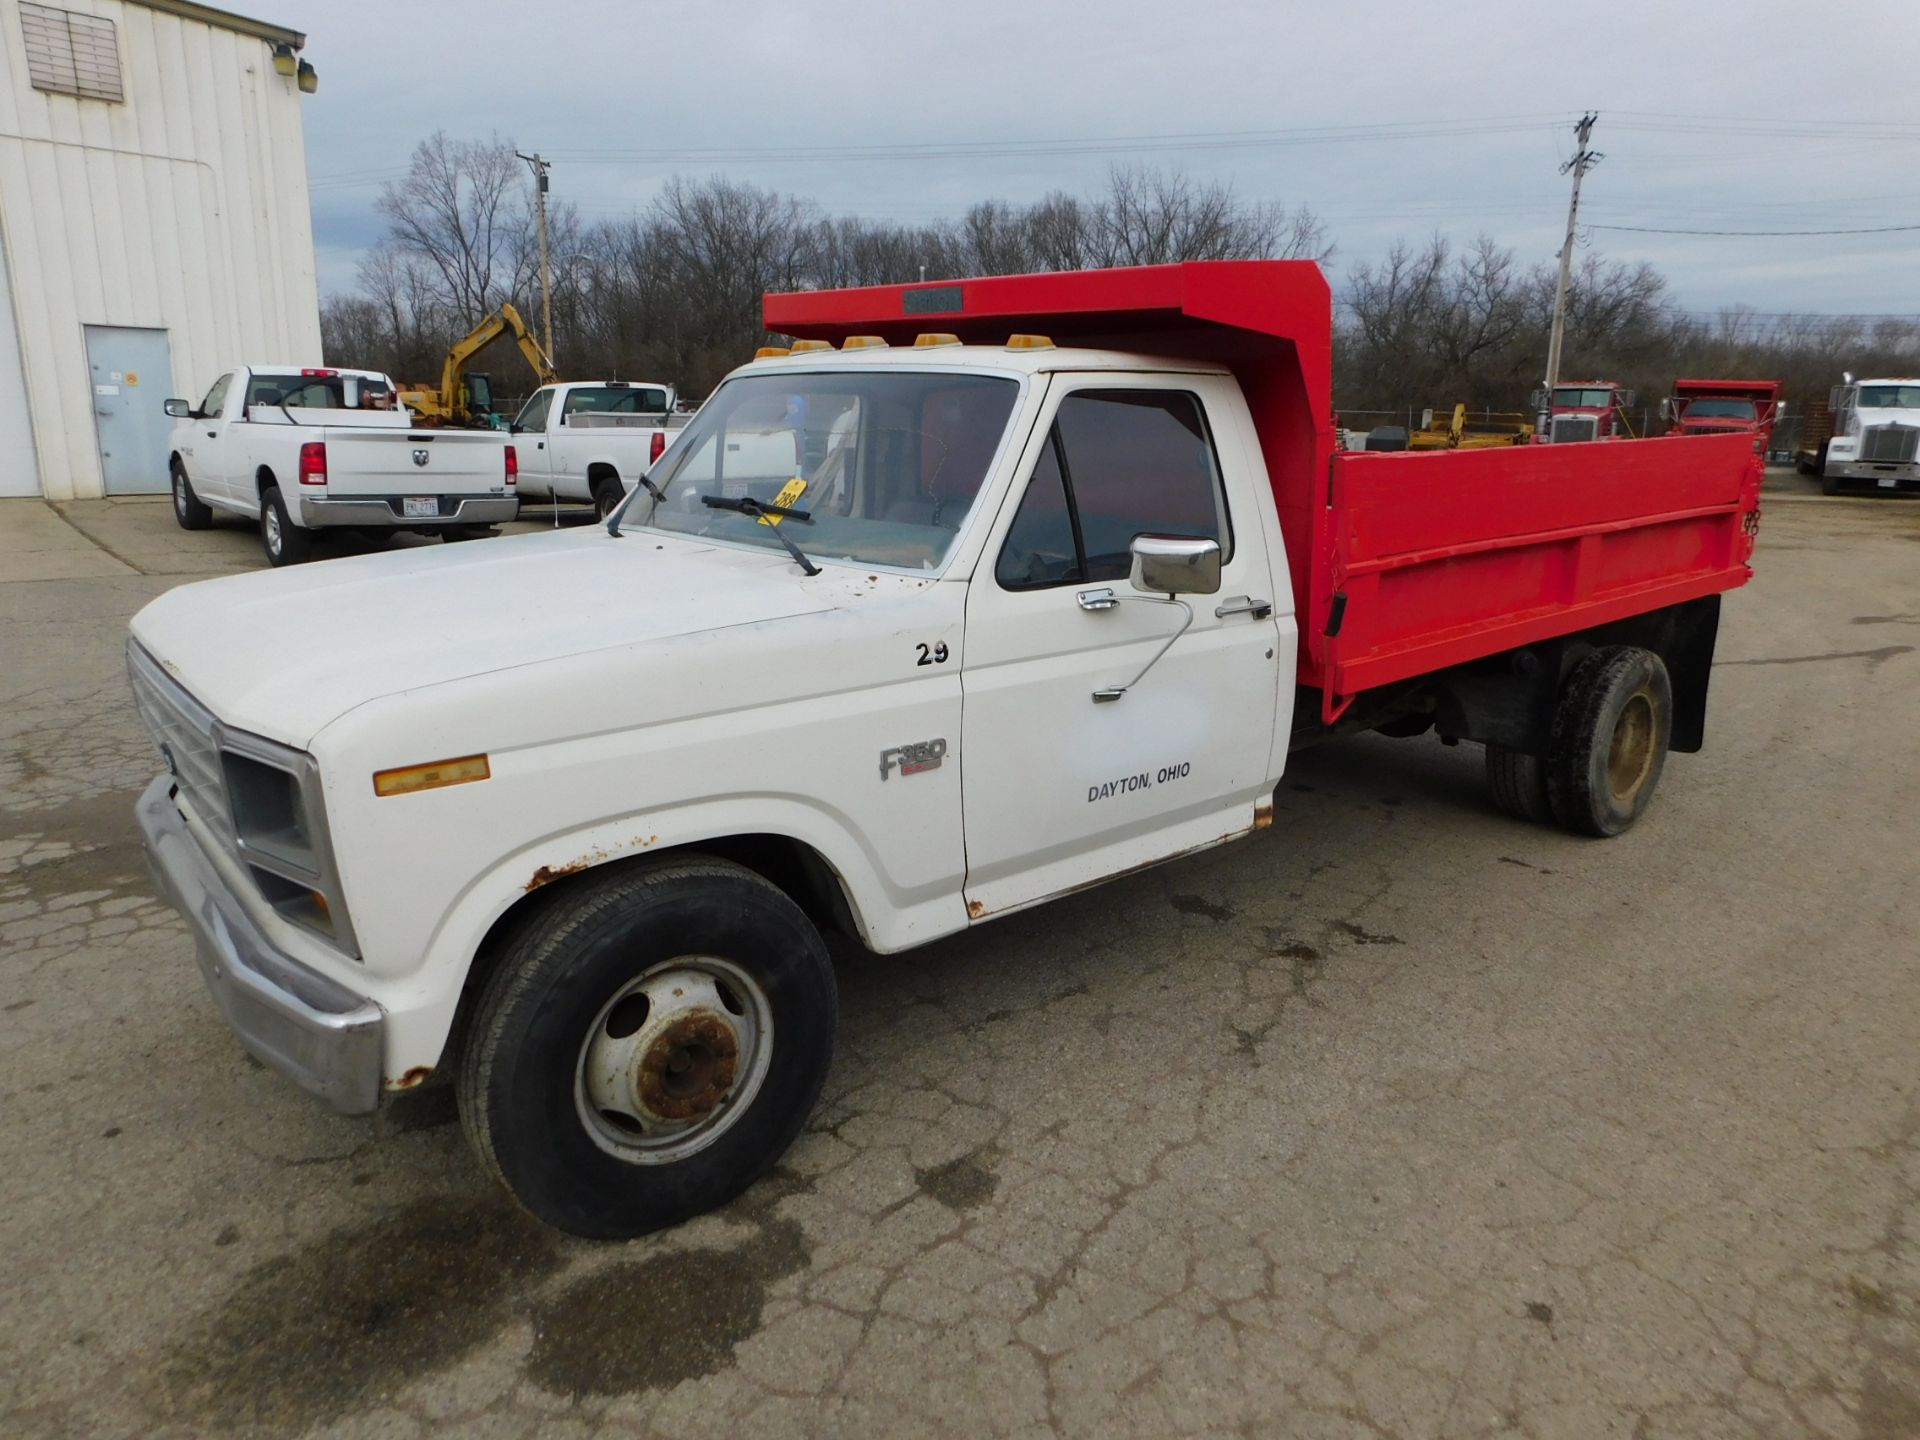 1986 Ford F-350 Single Axle Dump, Gas, 4-Speed Manual Transmission, PTO, 10' Steel Dump Bed, 81,